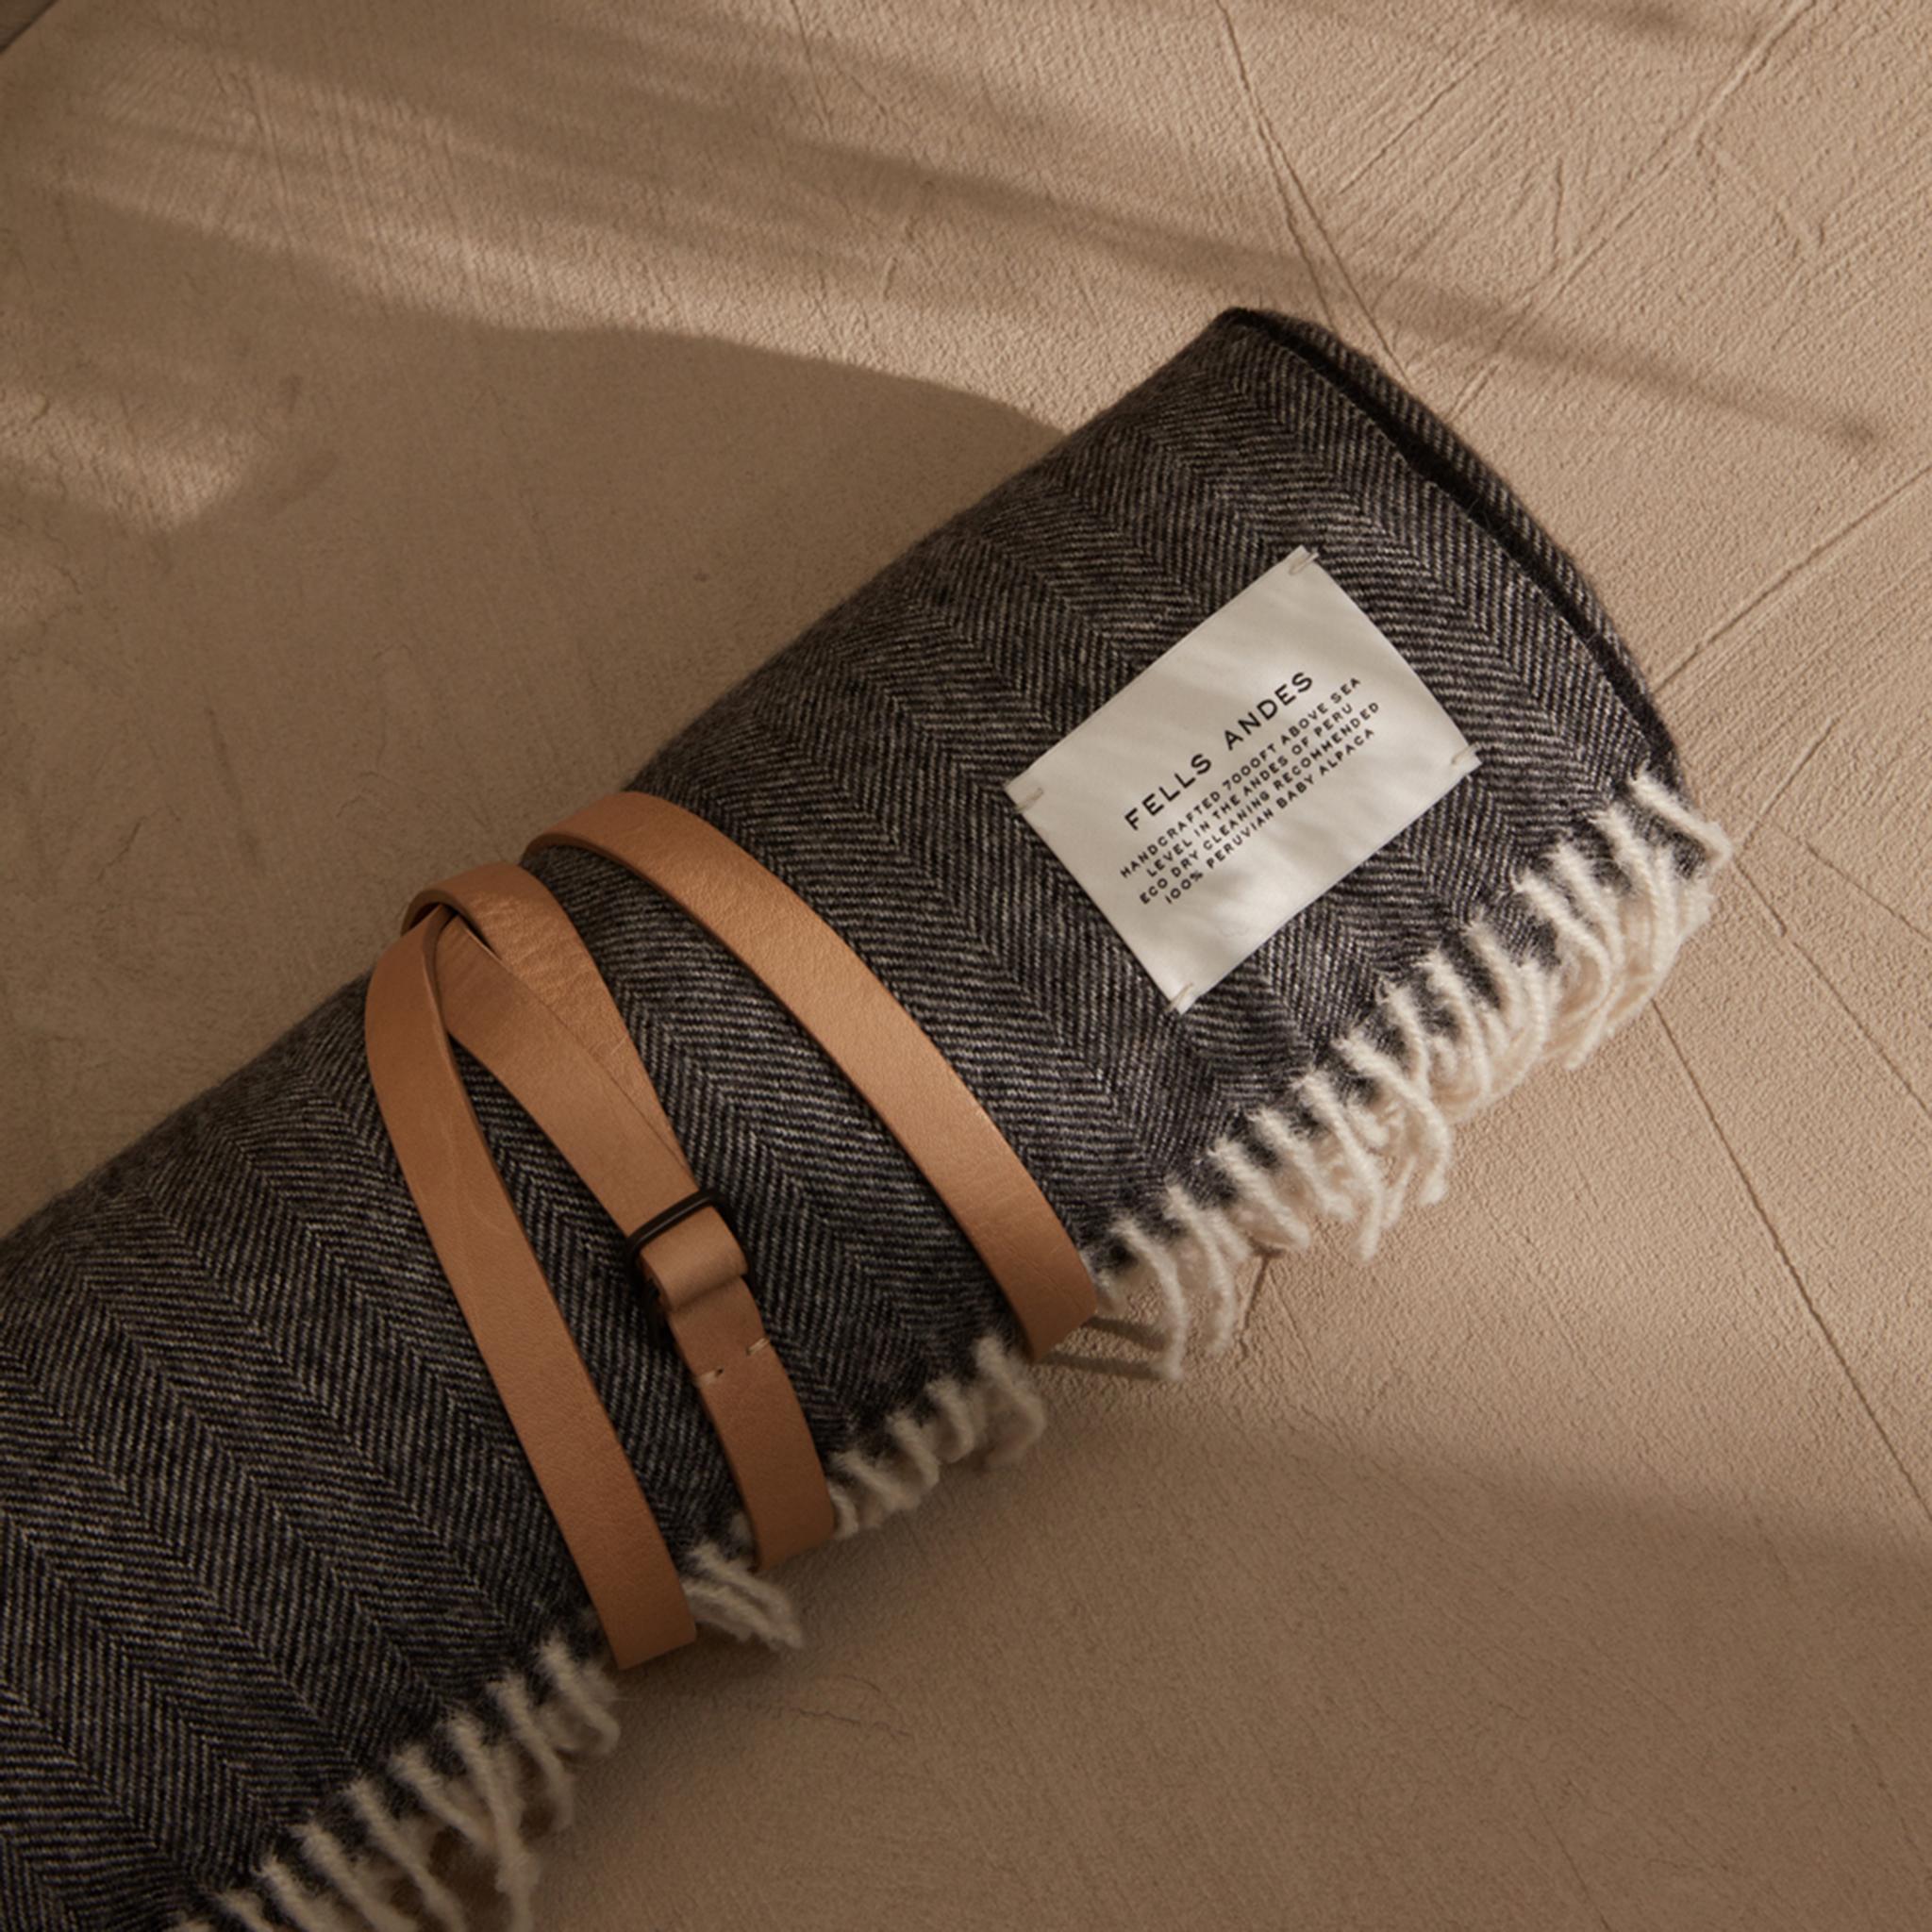 ABOUT

The Sill throw by Fells Andes is designed in San Francisco and handmade in the Andes, supporting local culture and craft.

Made from 100% Royal Baby Alpaca – one of the finest, most luxurious materials in the world – it is extremely soft yet